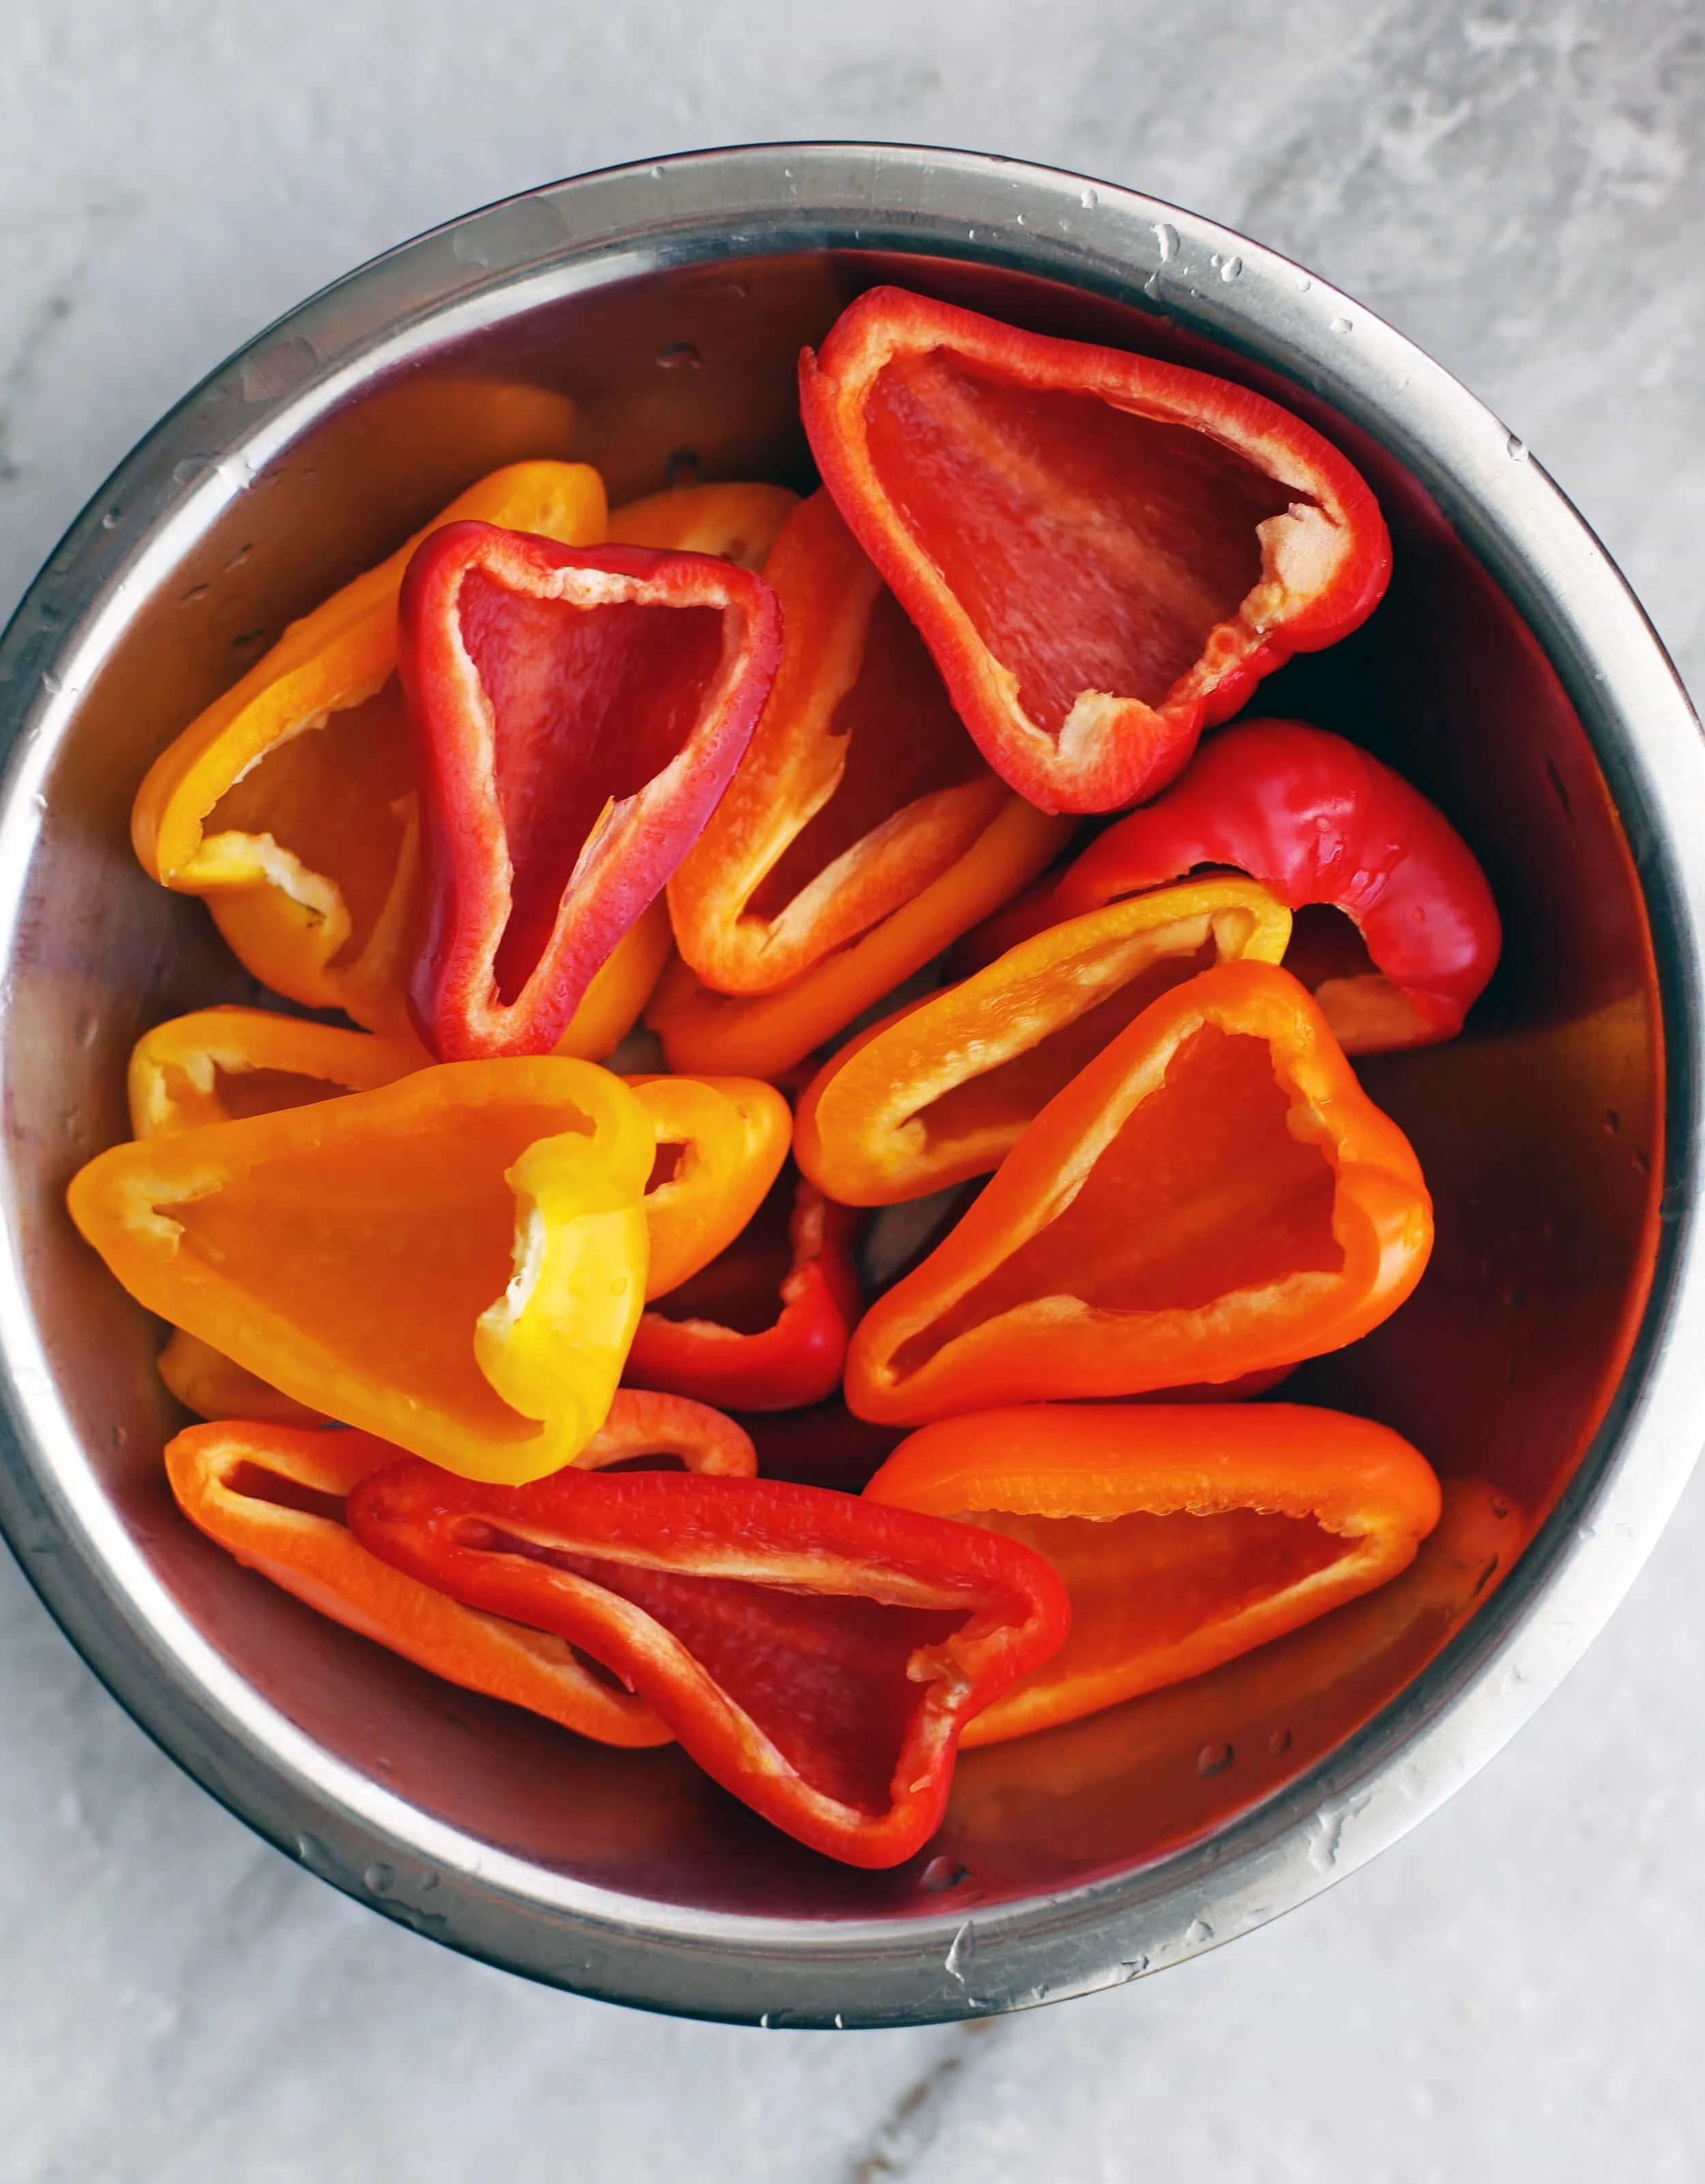 A metal bowl containing baby bell peppers that are sliced lengthwise and seeded.